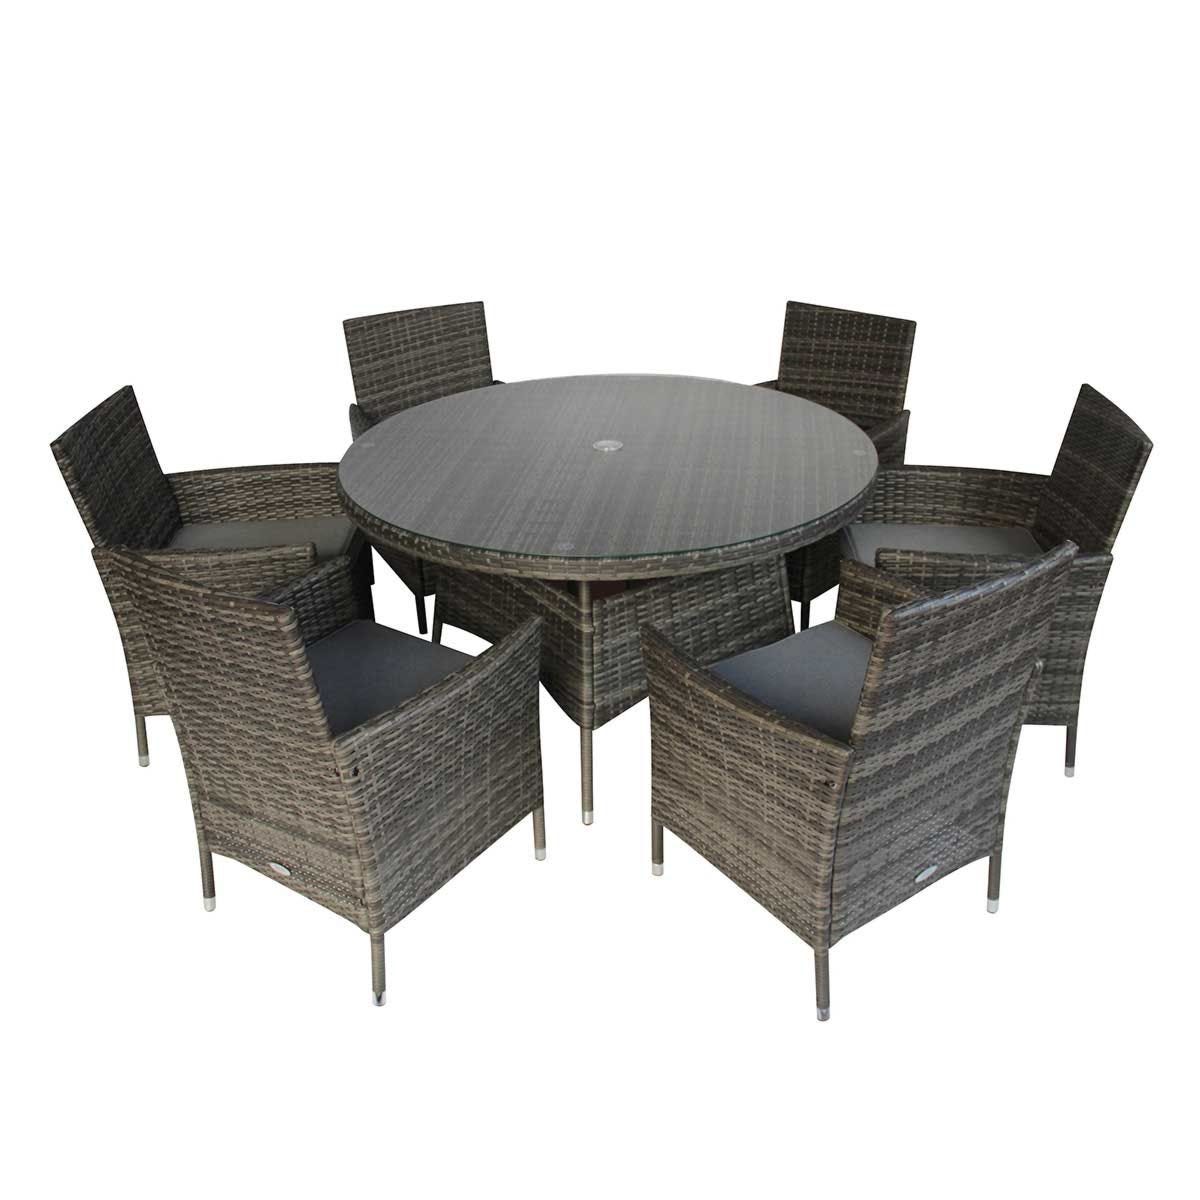 Natural Charles Bentley Pair Of Rattan Dining Chairs Garden Furniture